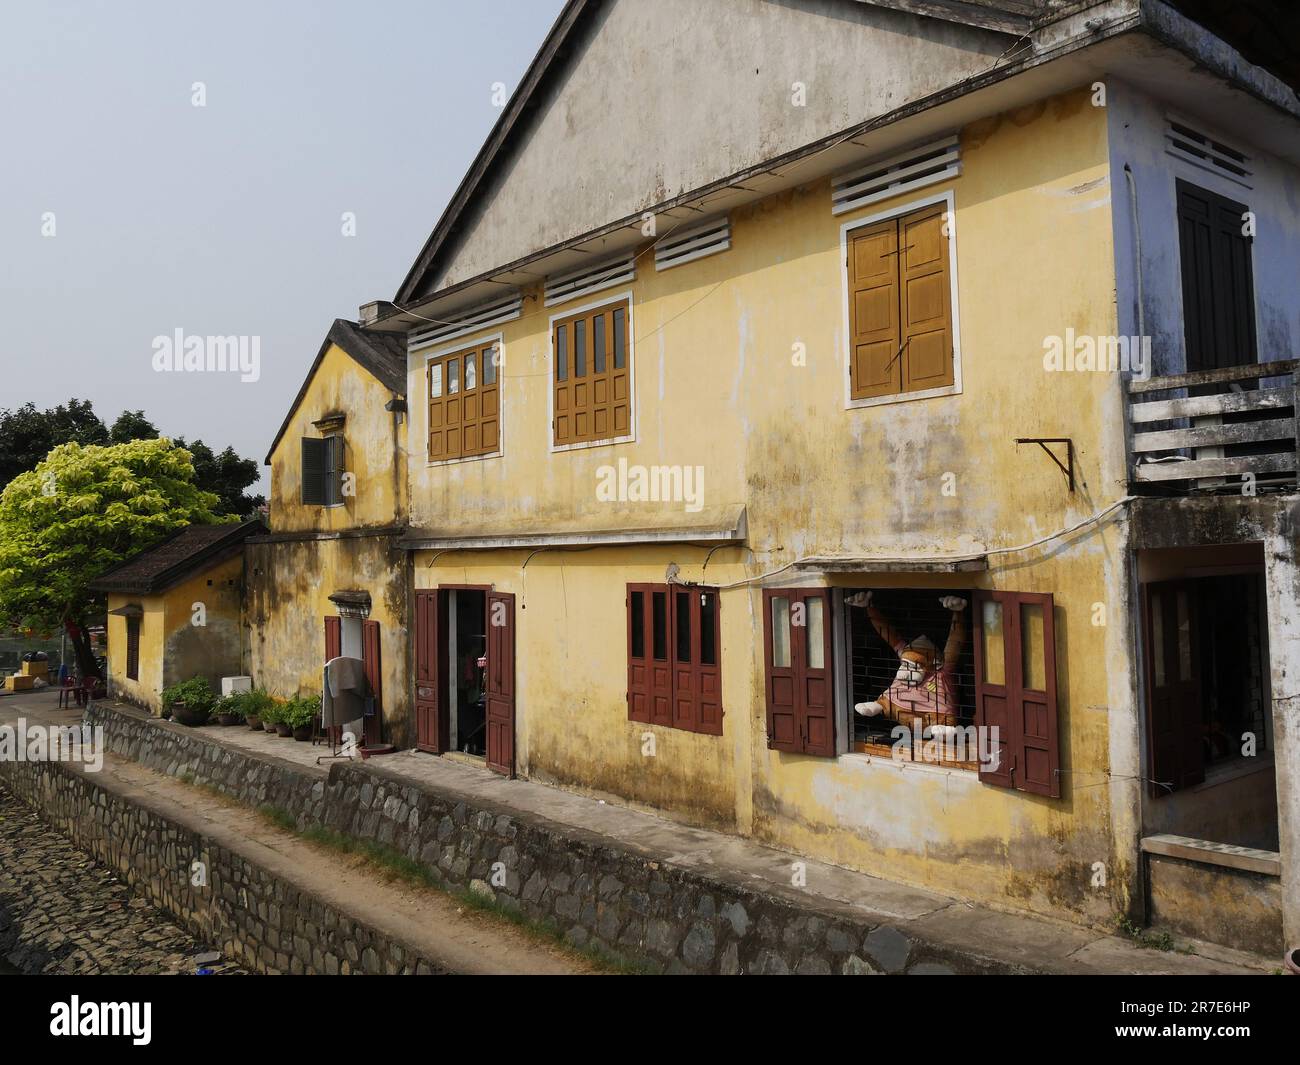 Vietnam, Quang Nam Province, Hoi An City, Old City listed at World Heritage site by Unesco, Houses Stock Photo